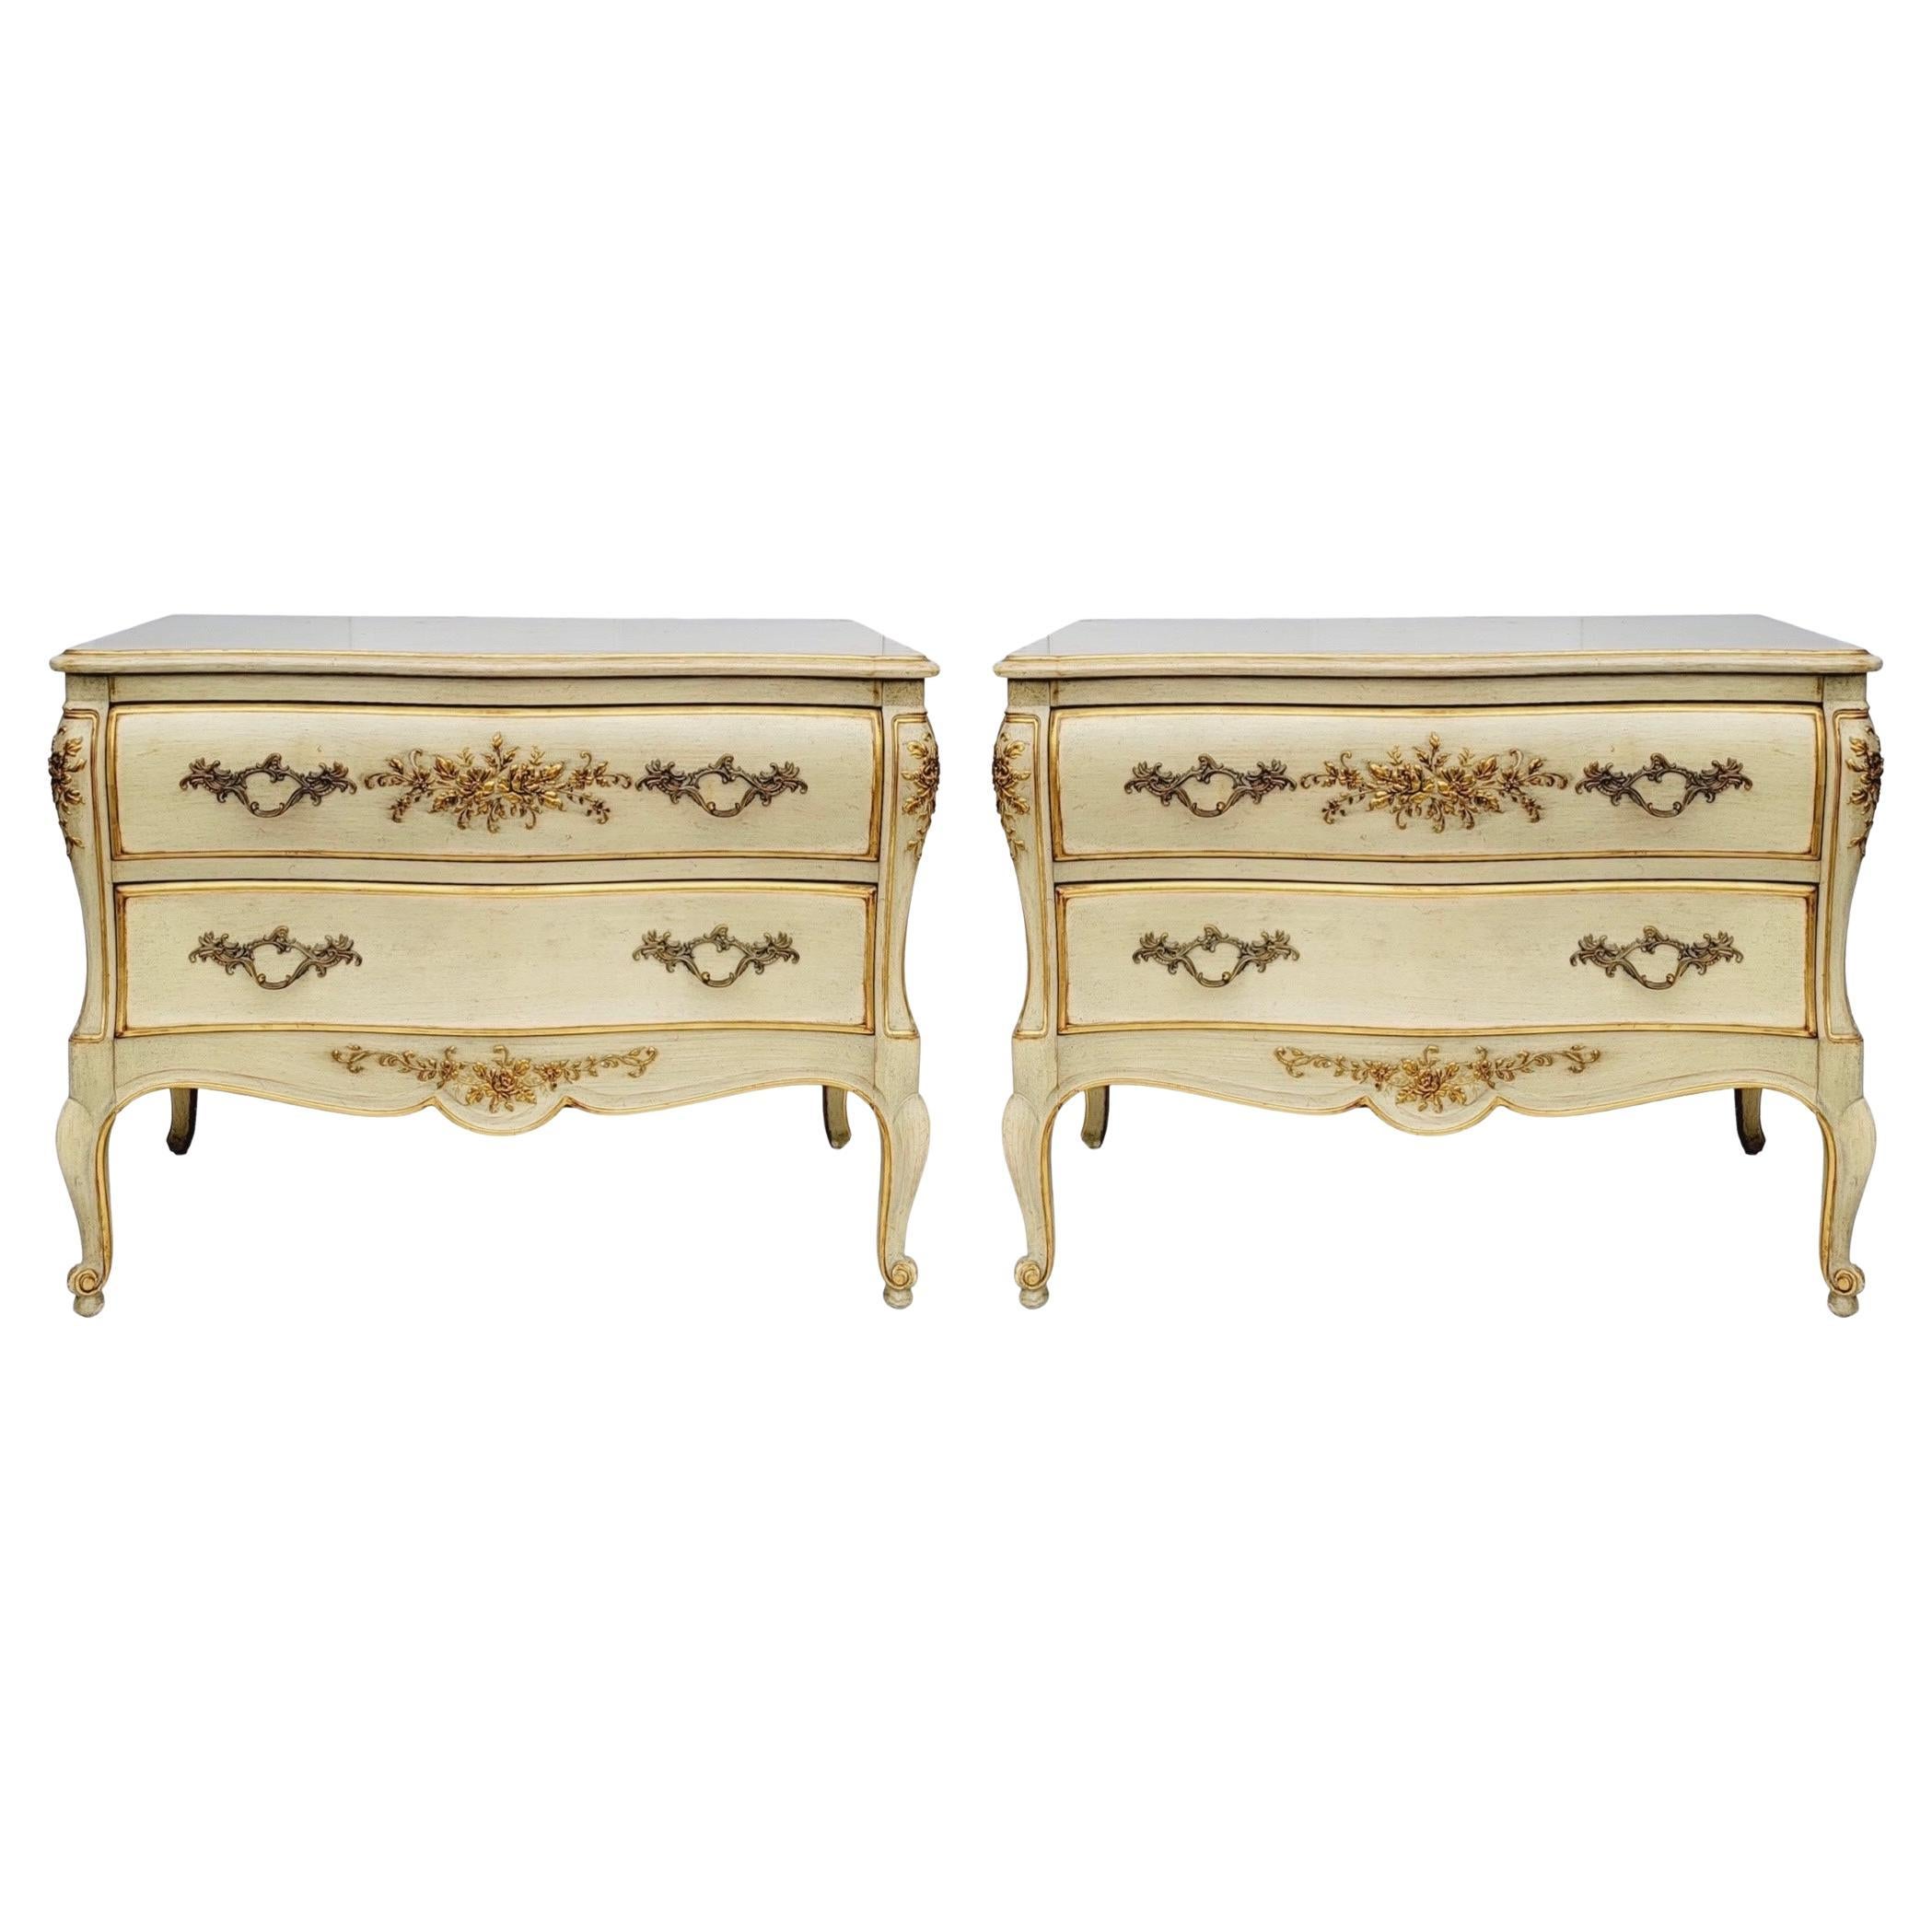 1970s French Louis  XV Style Painted And Gilded Chests / Commodes By Dixon For Sale